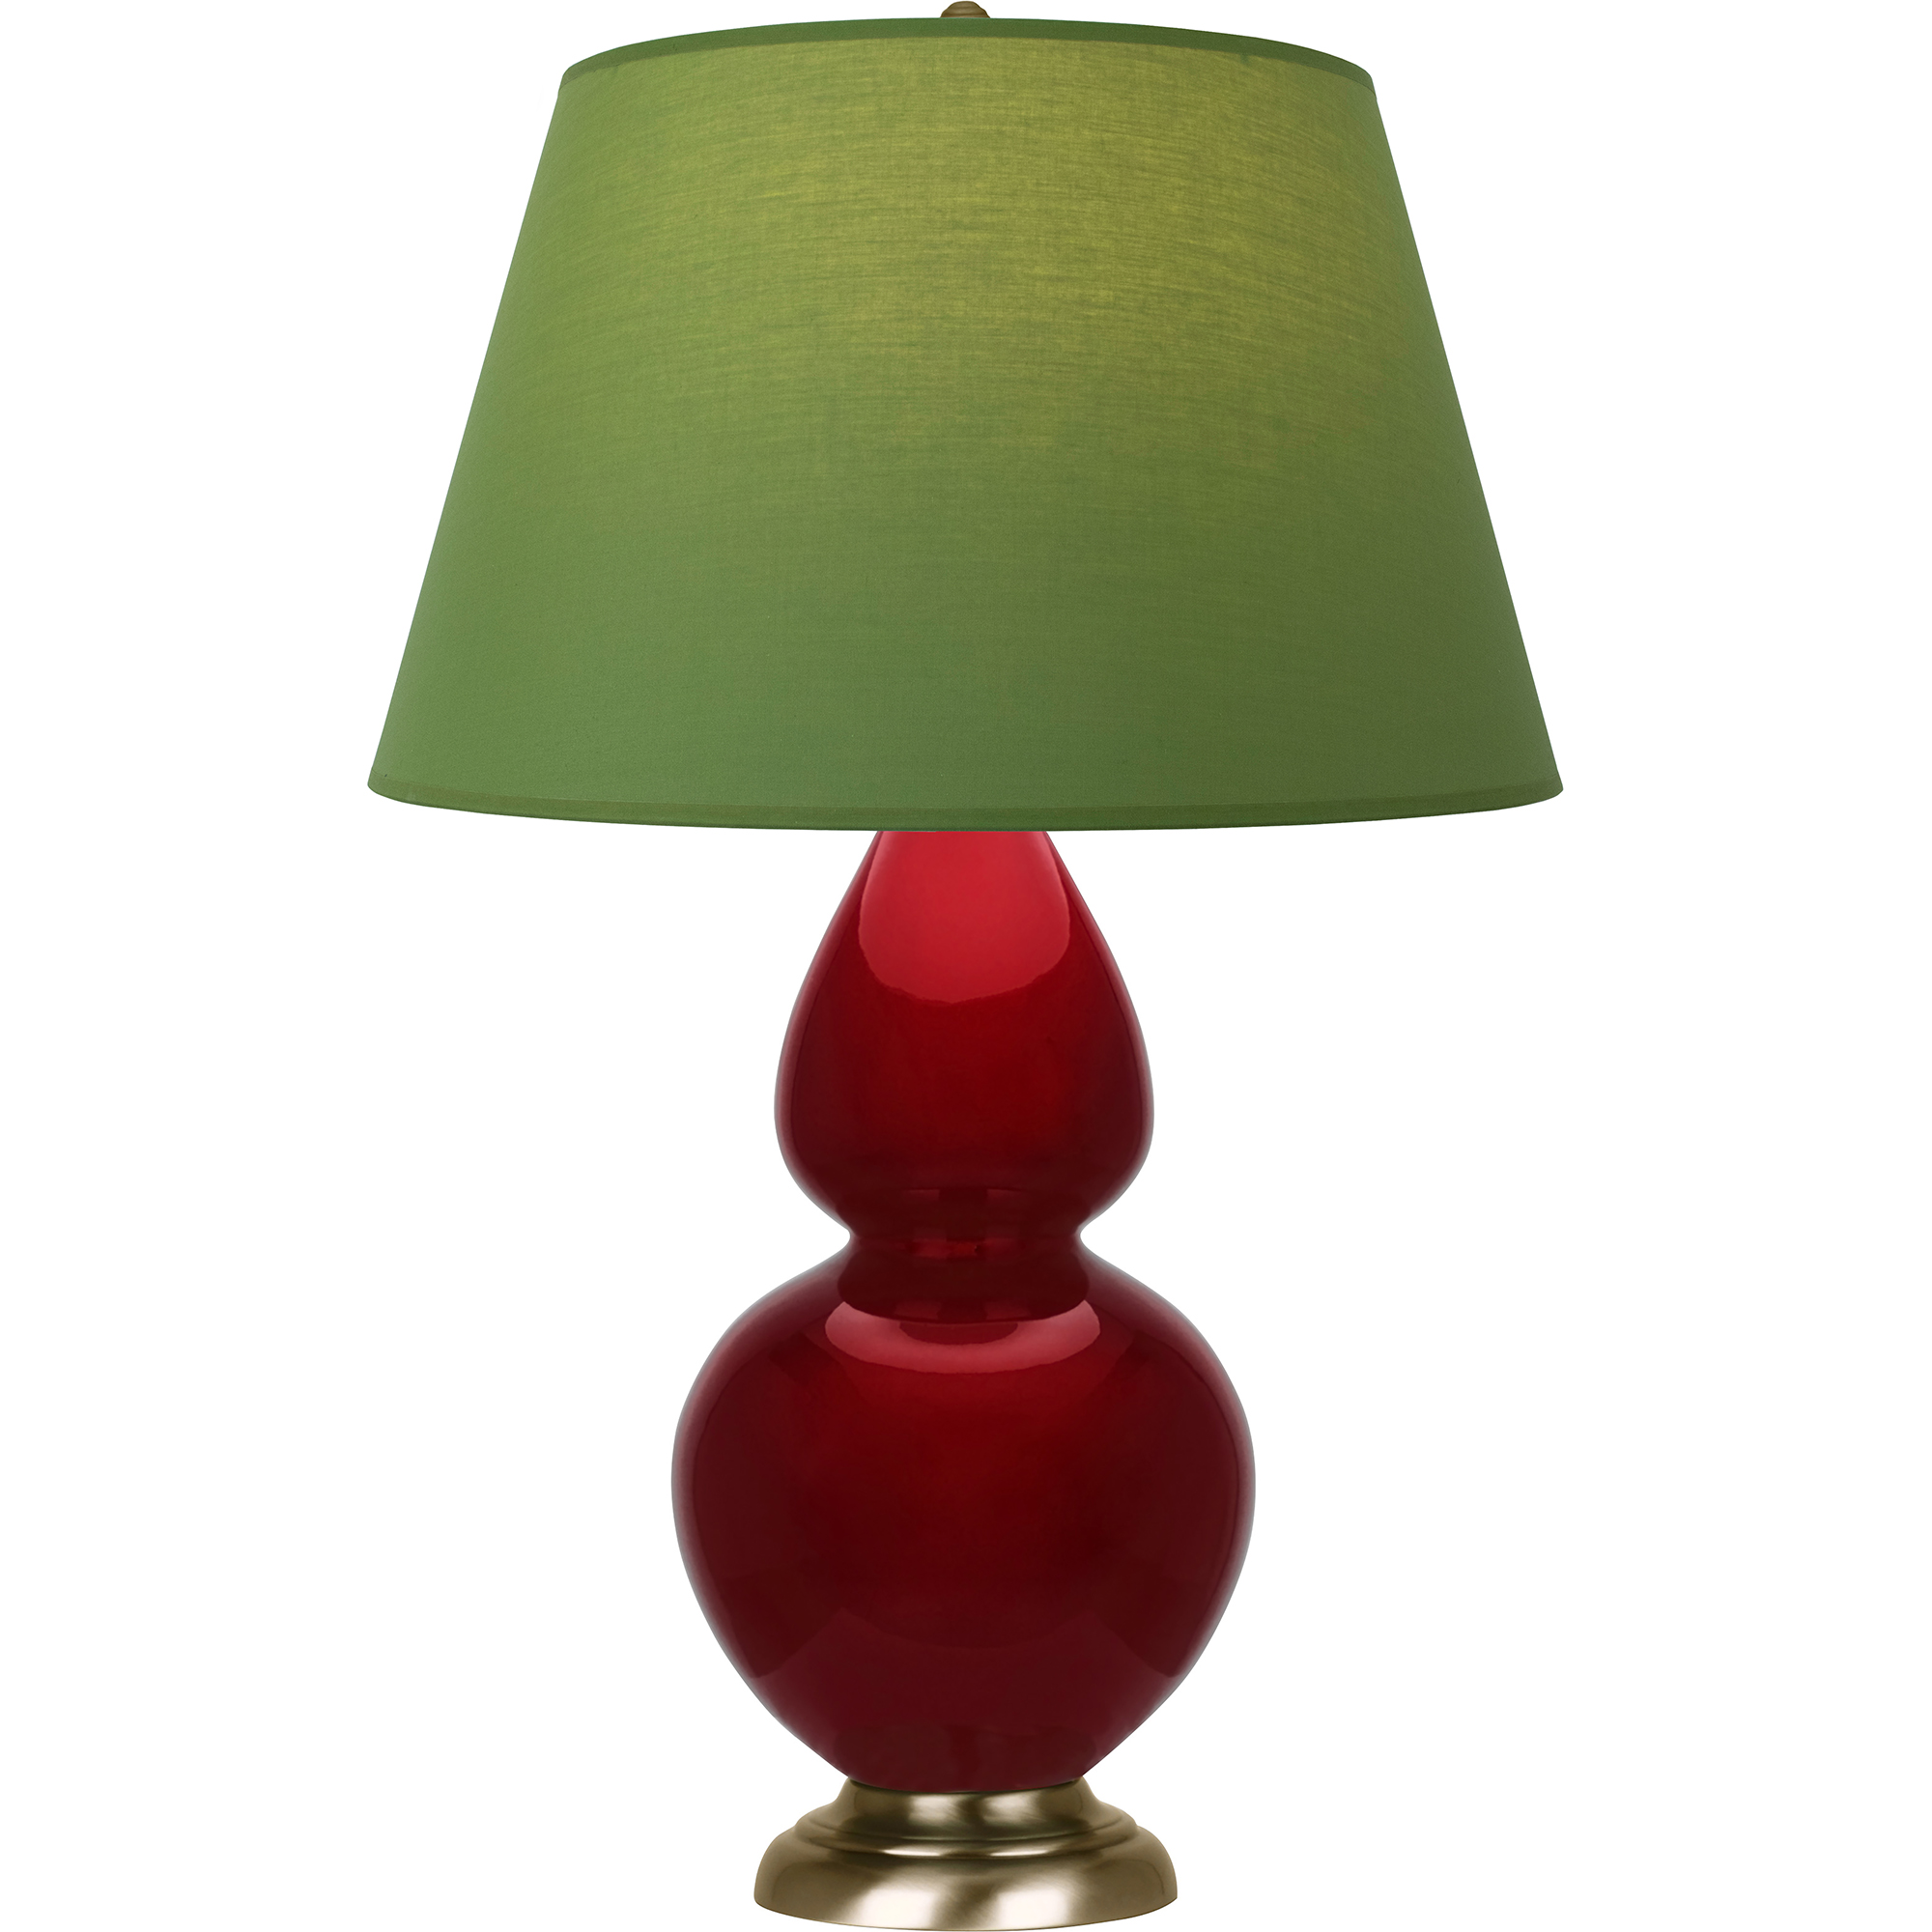 Double Gourd Table Lamp Style #SA20G